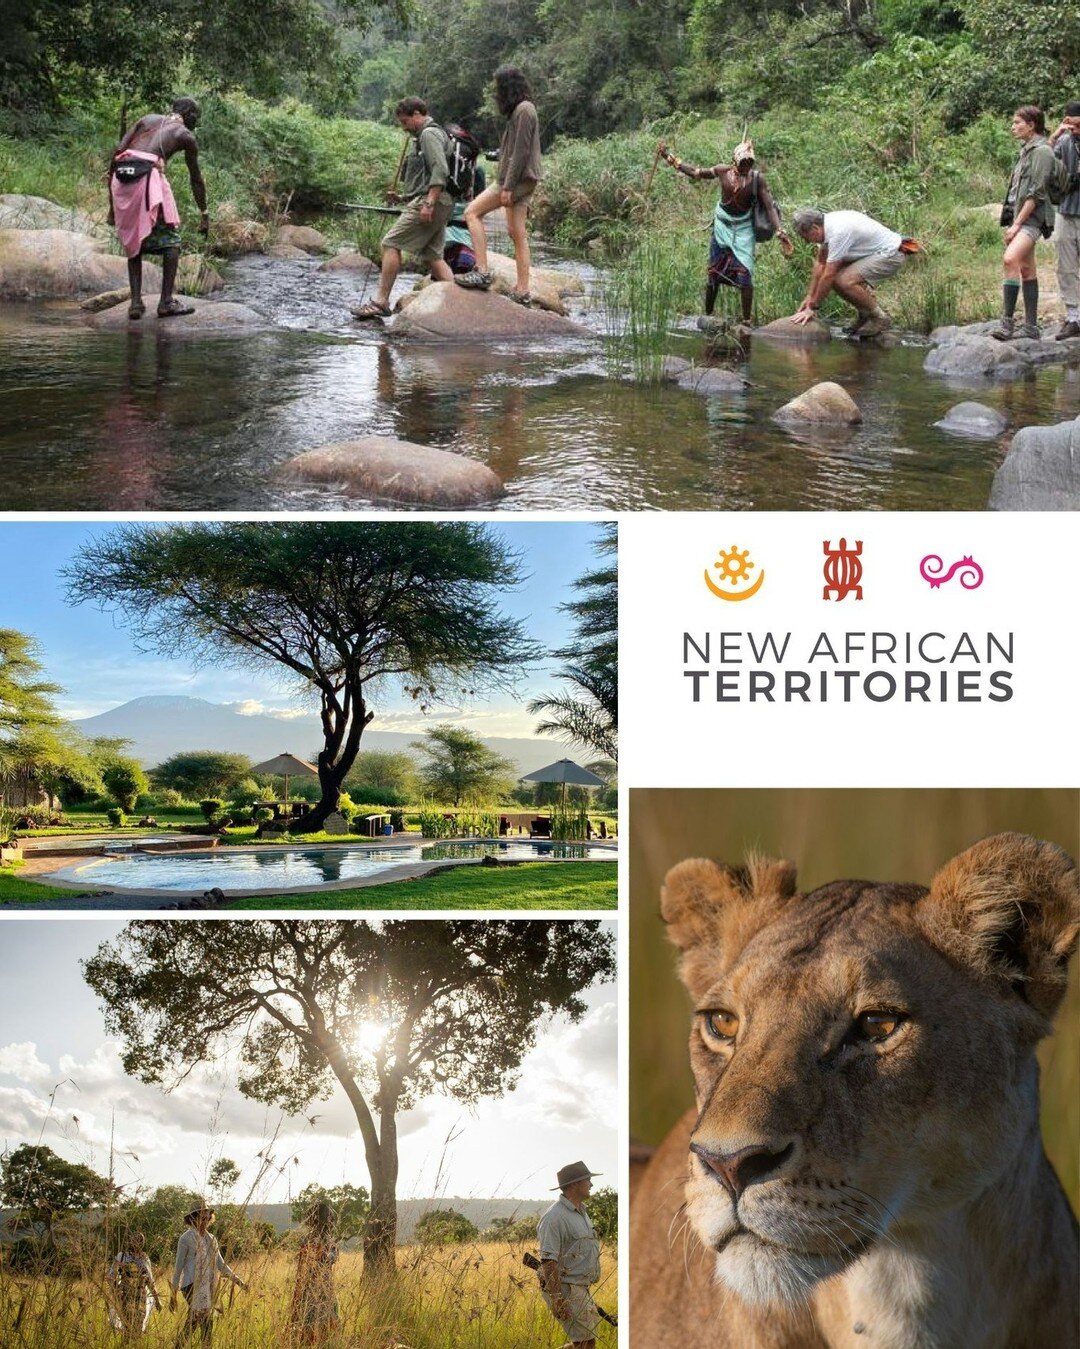 Walking, wildlife &amp; wondrous views! 

award-winning | exquisite locations | unique | individual | un-franchised 

________________________
www.africanterritories.co.ke
________________________

#travel #nature #travelphotography #photography #lov